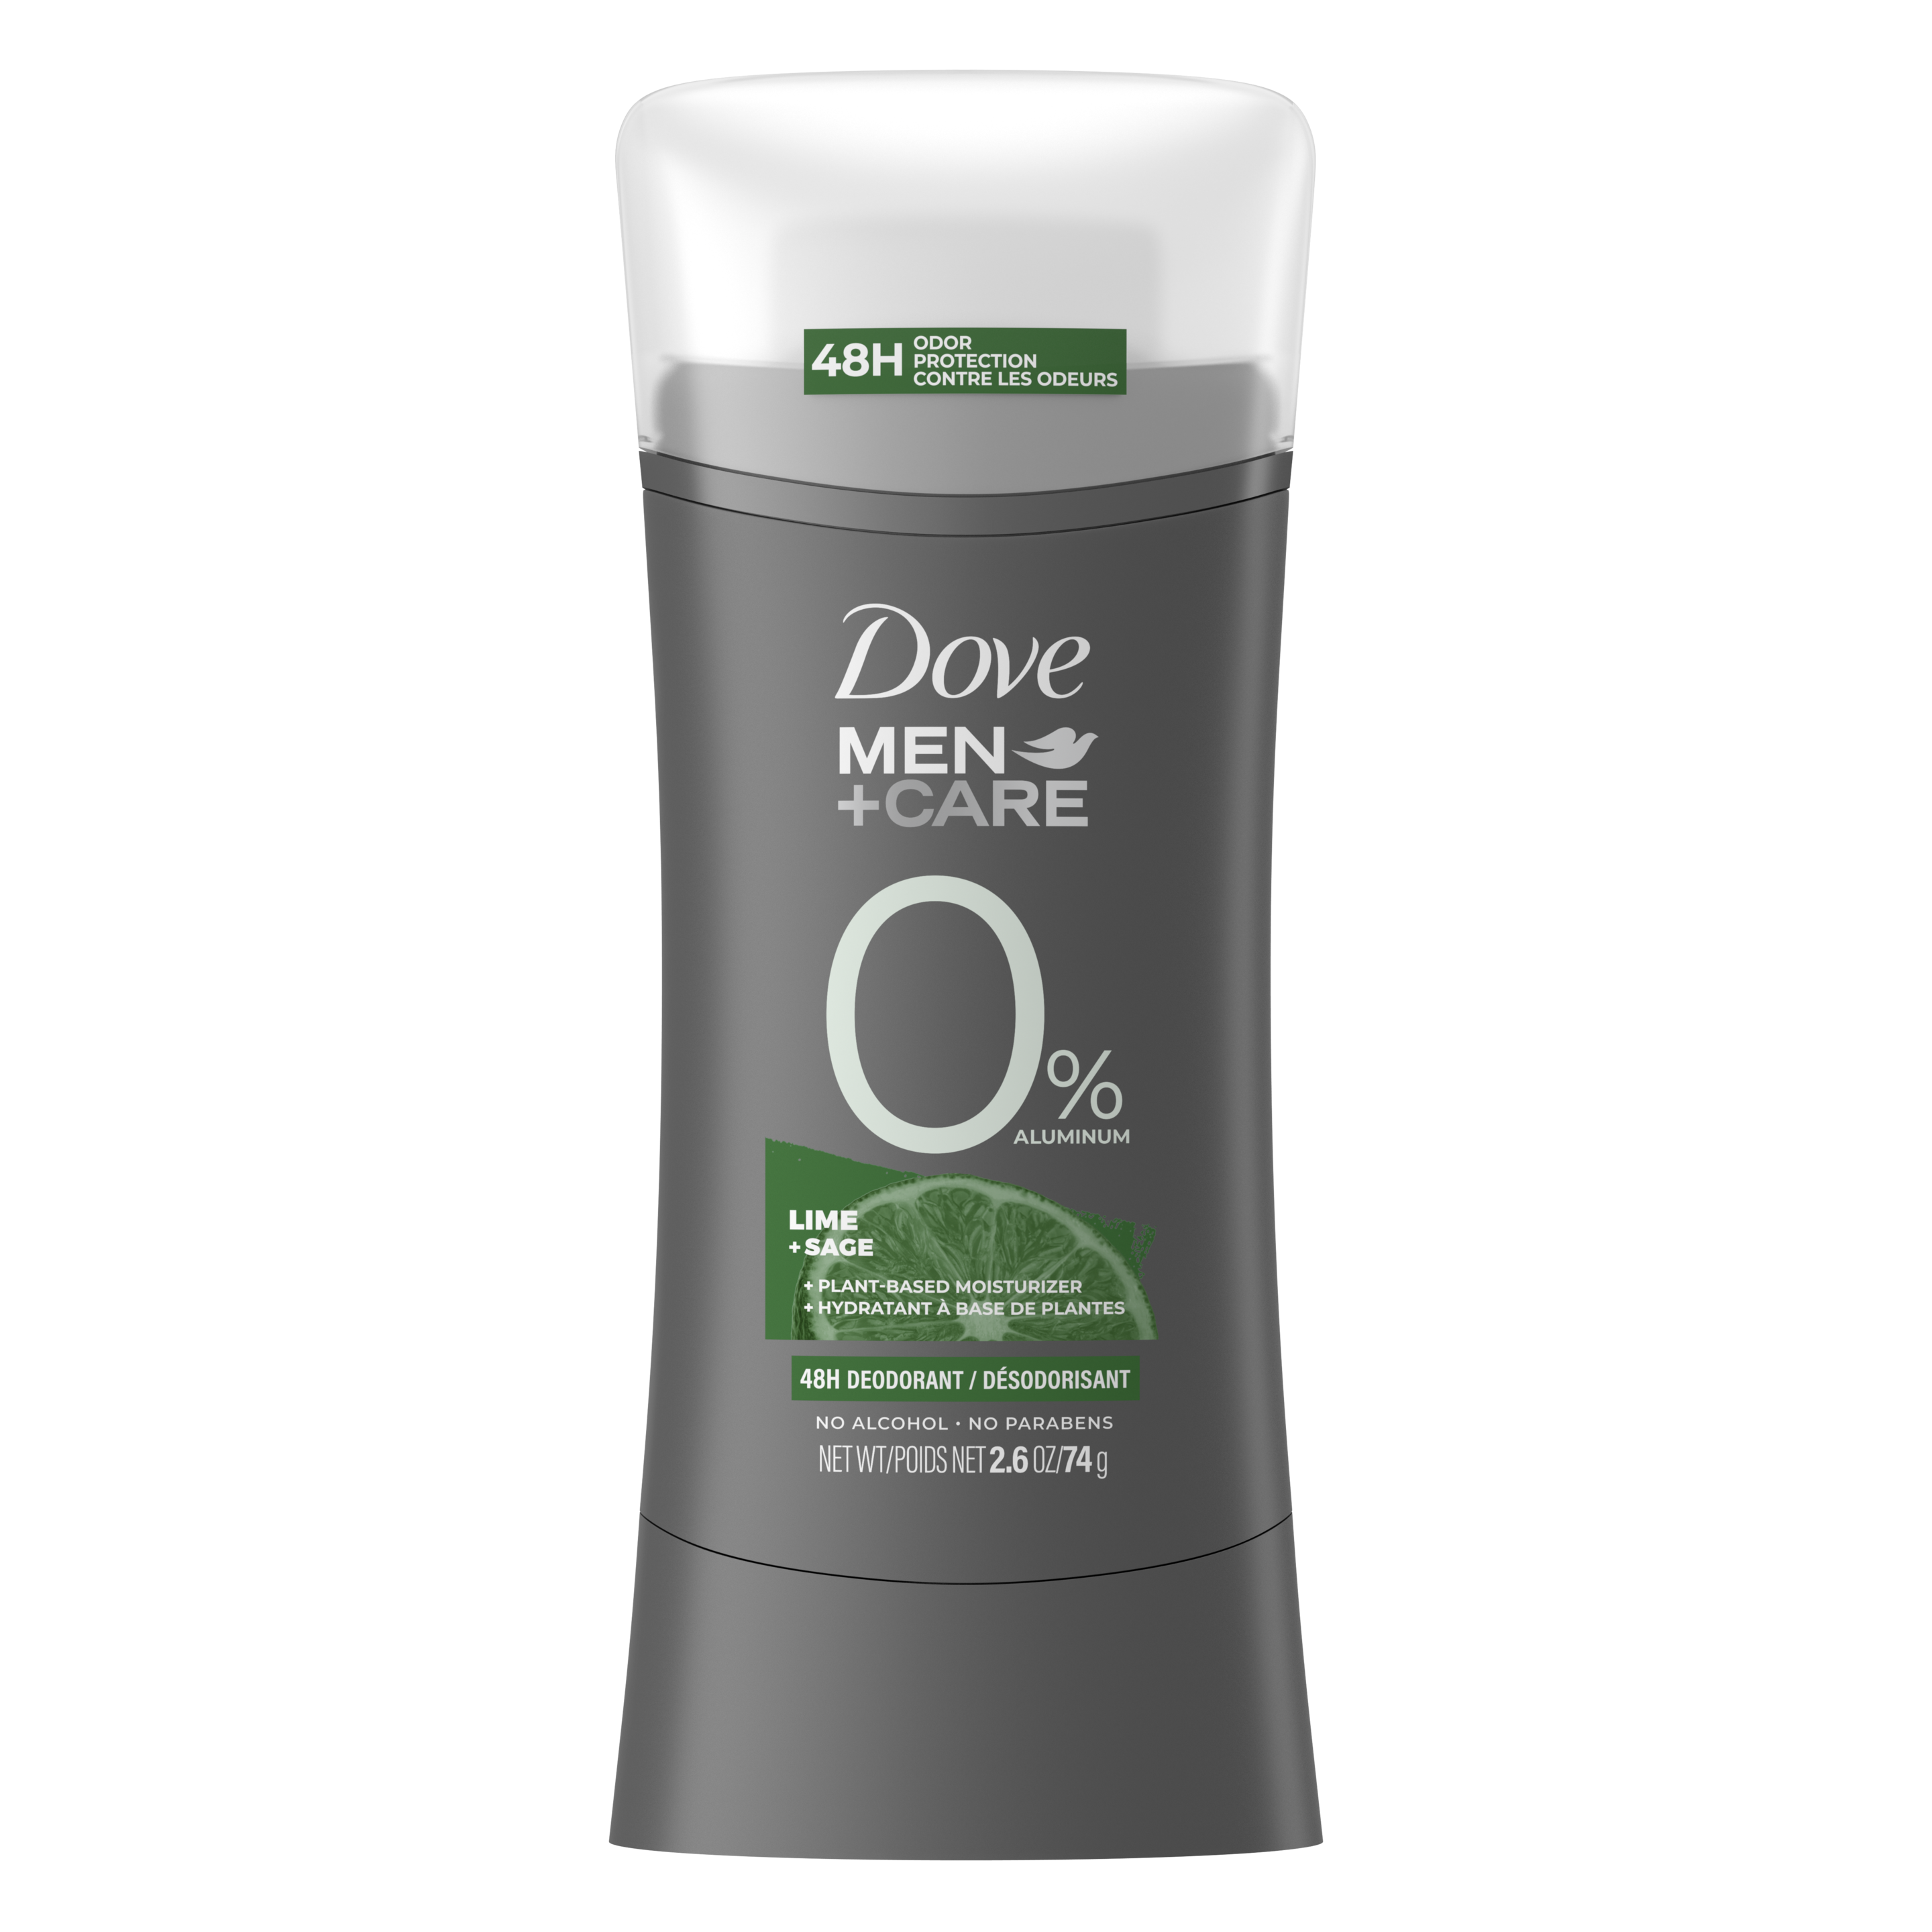 Lime + Sage 0% Aluminum 48h Deodorant Front of Pack